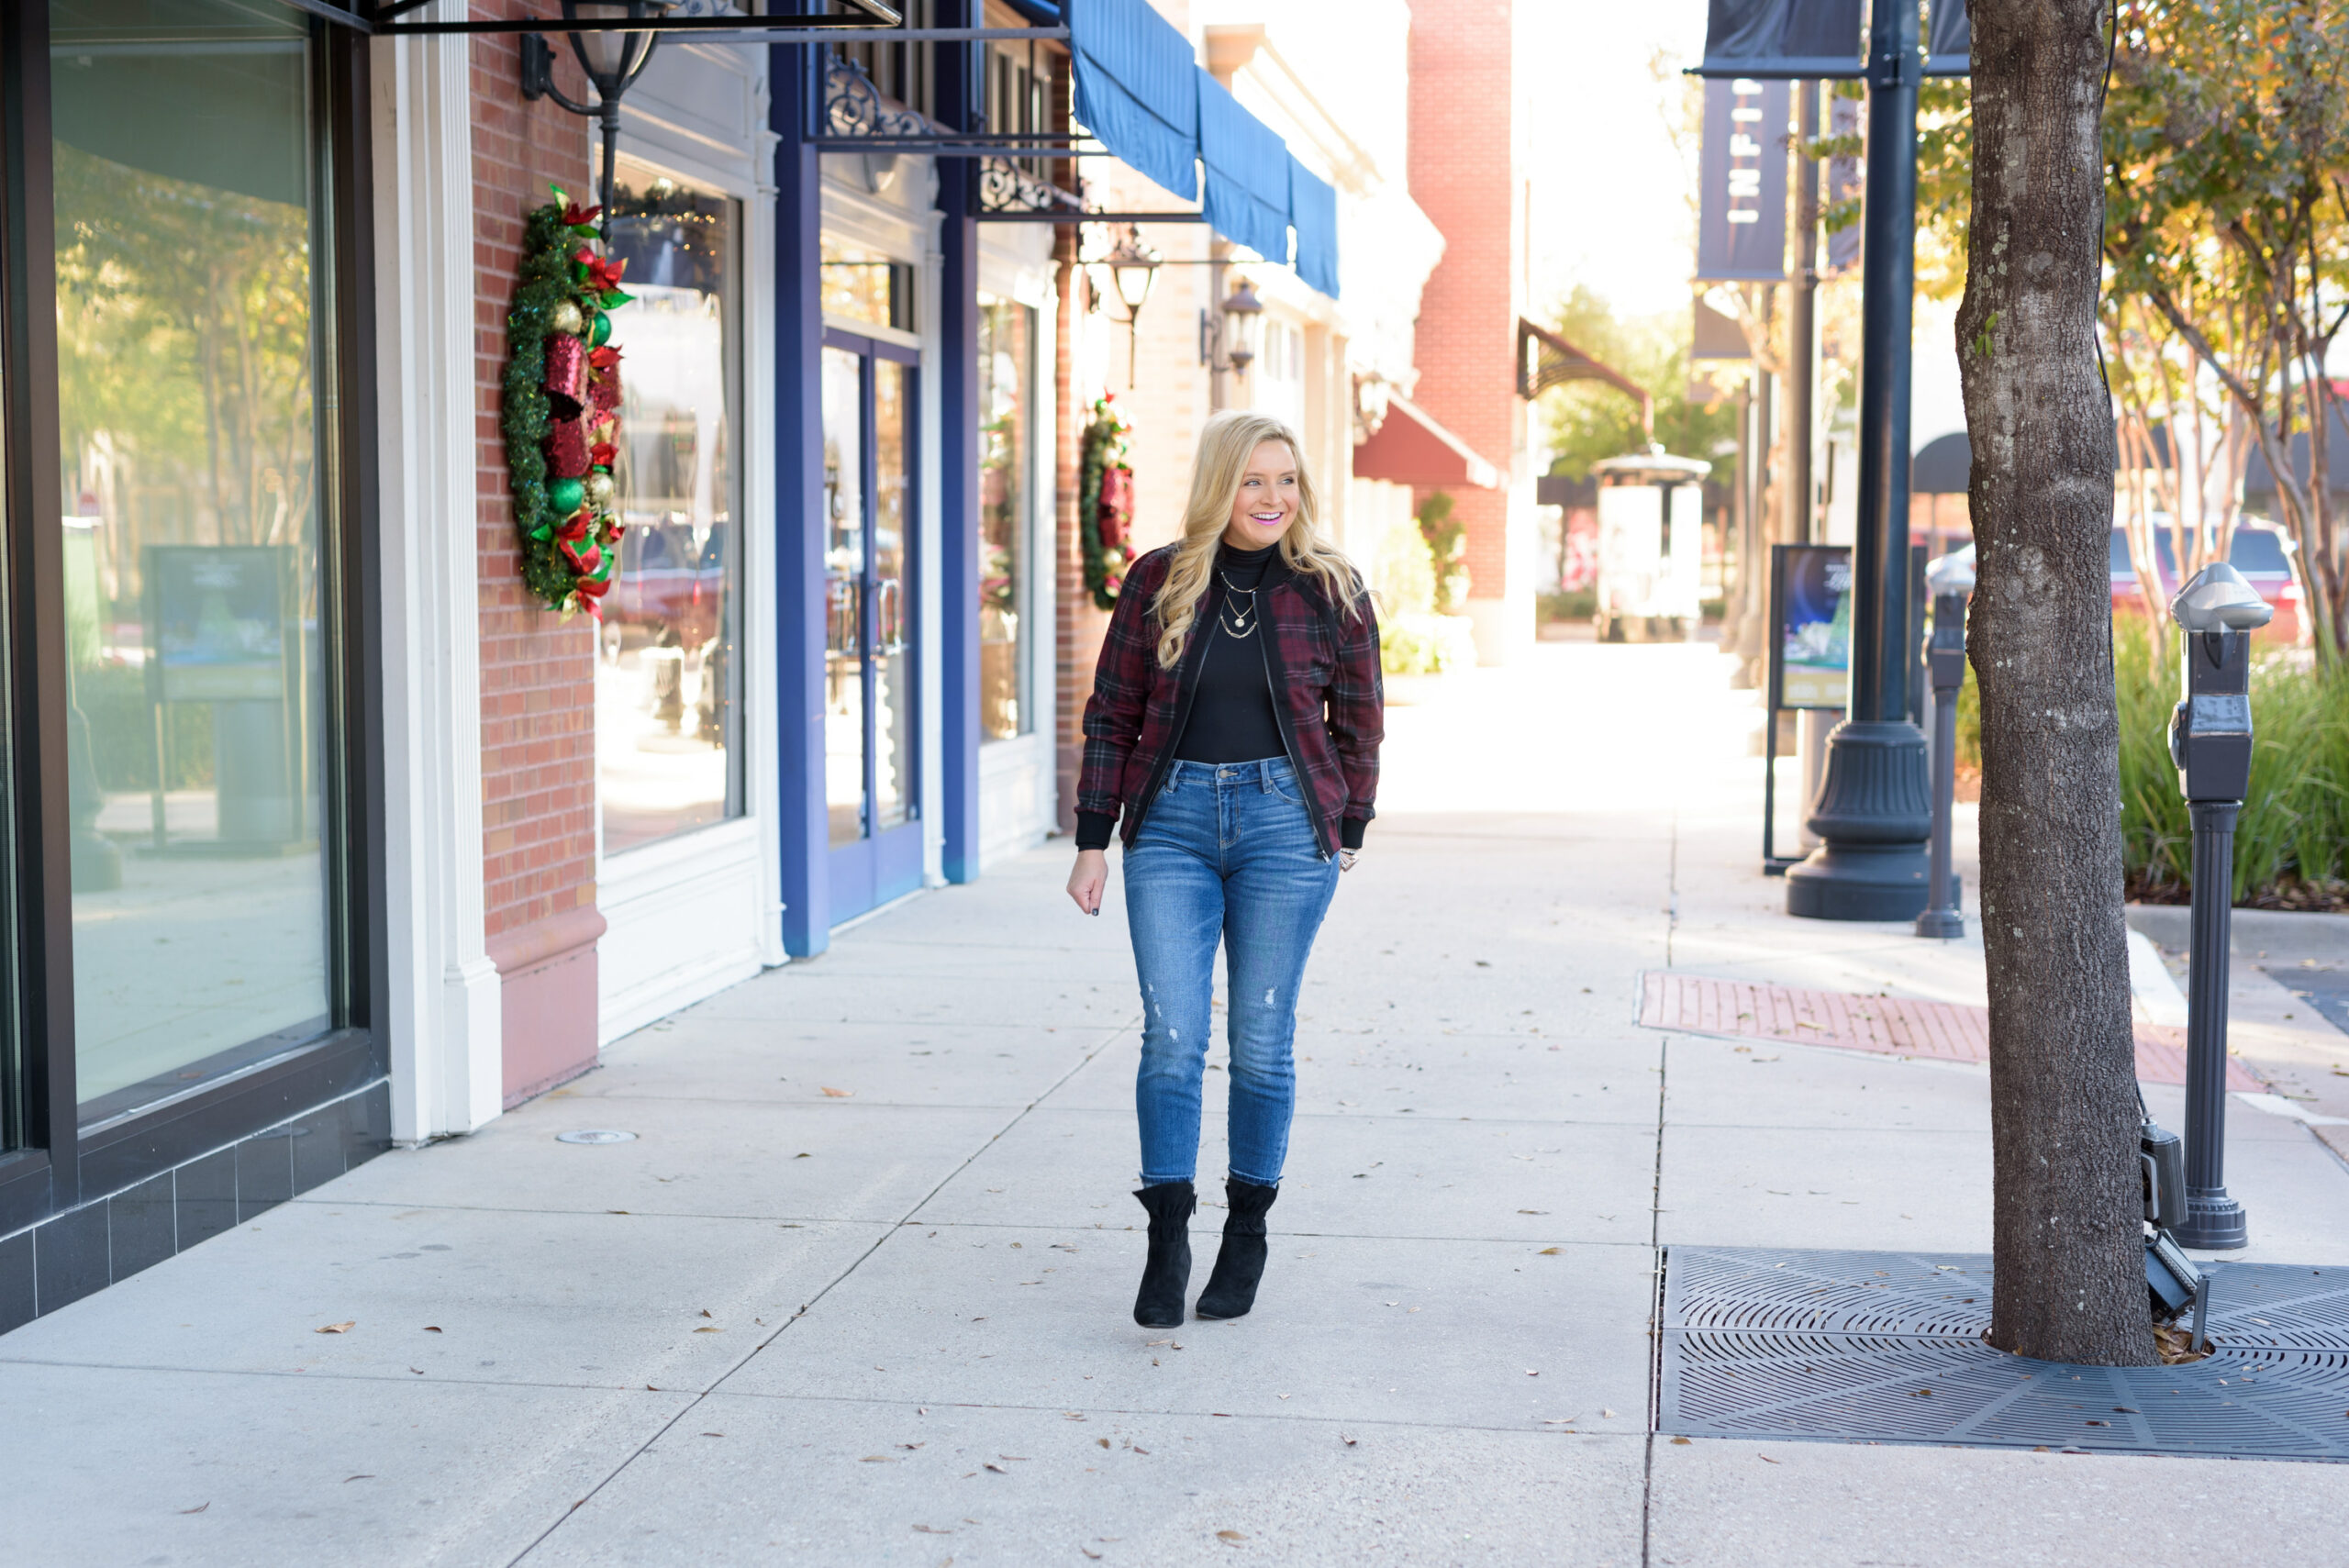 Winter Outfits by popular Houston fashion blog, Fancy Ashley: image of a woman standing outside and wearing Liverpool Los Angeles jeans, black turtleneck top, black ankle boots, and plaid jacket.